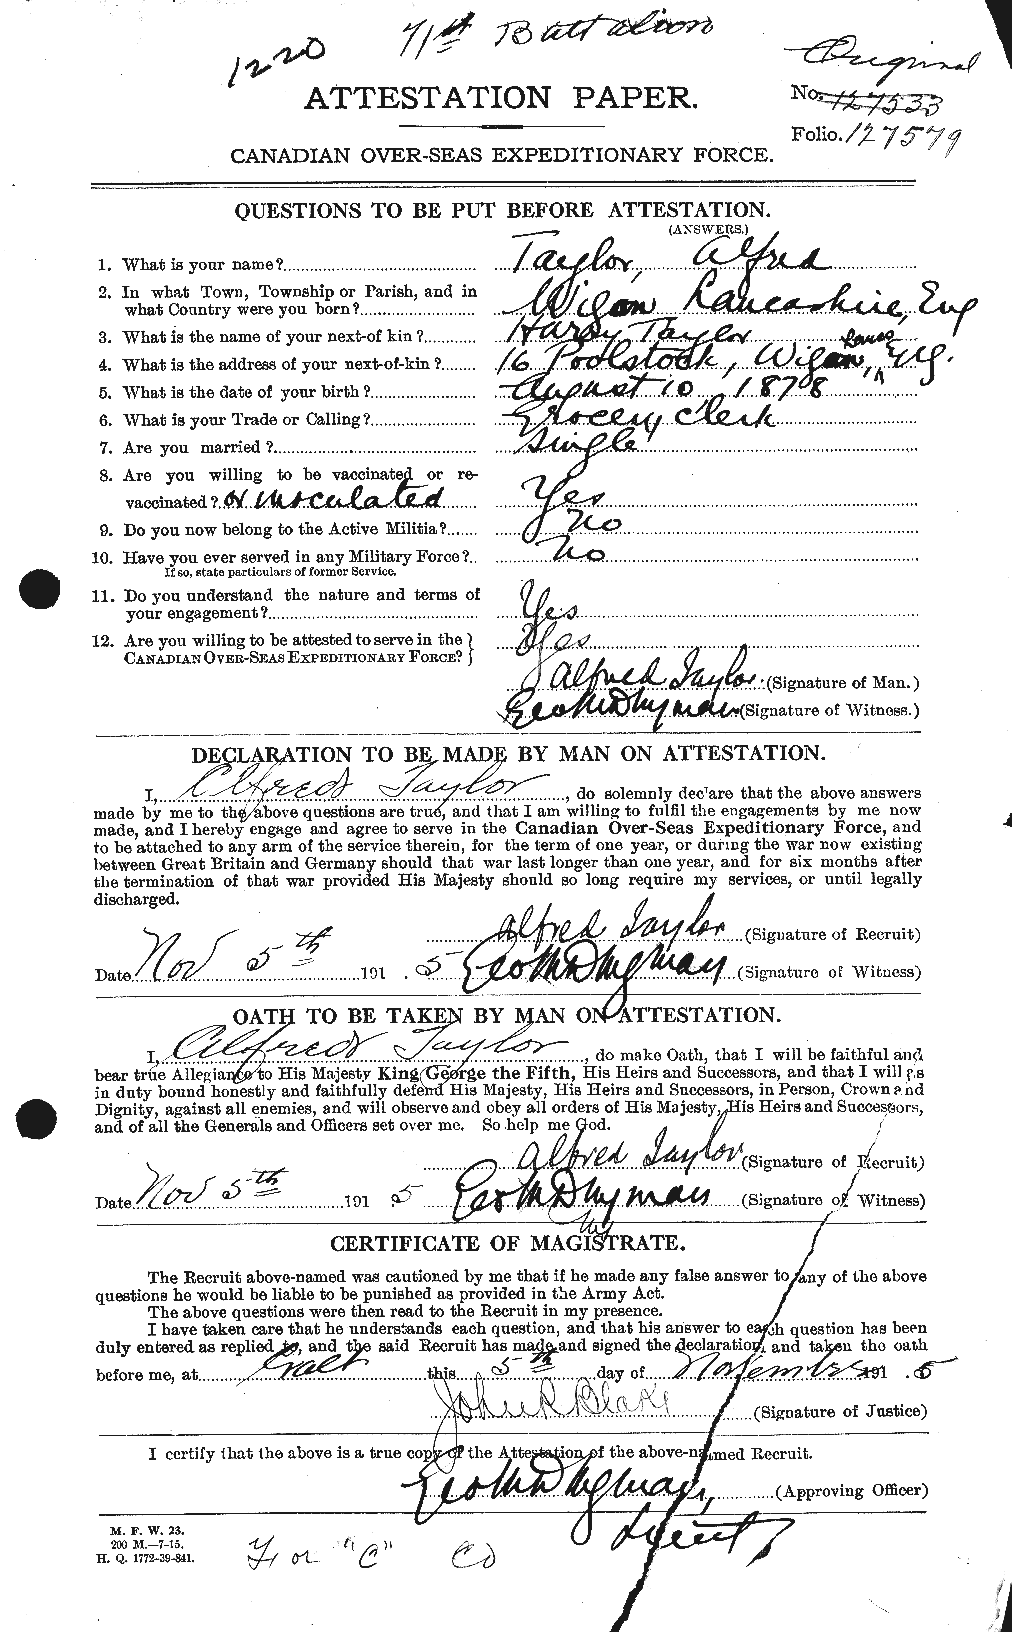 Personnel Records of the First World War - CEF 626171a